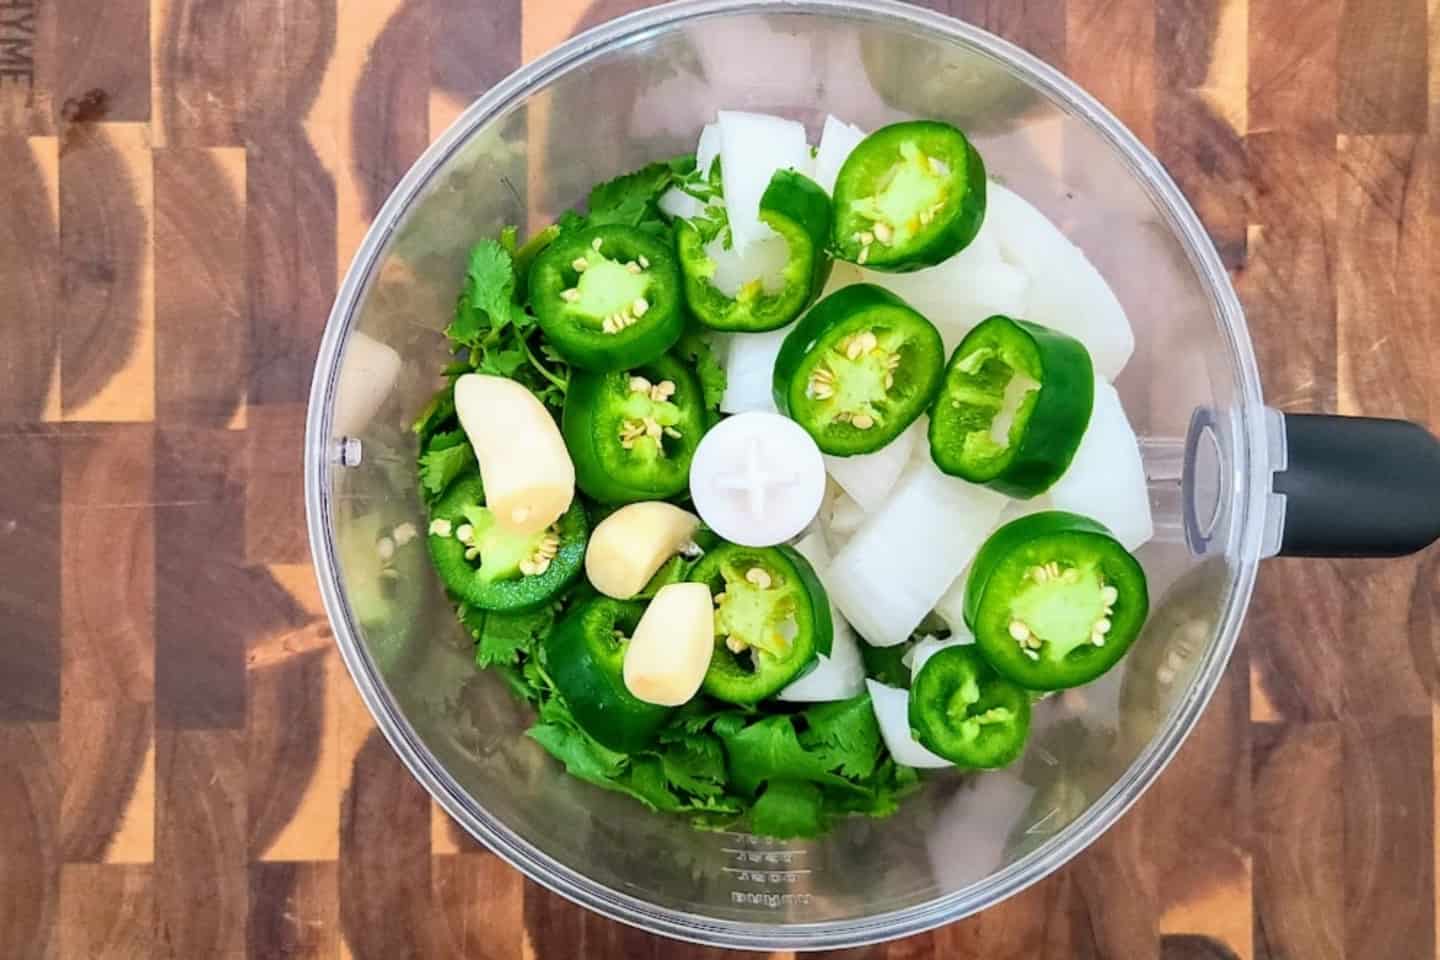 Chop your onions and jalapenos into small pieces